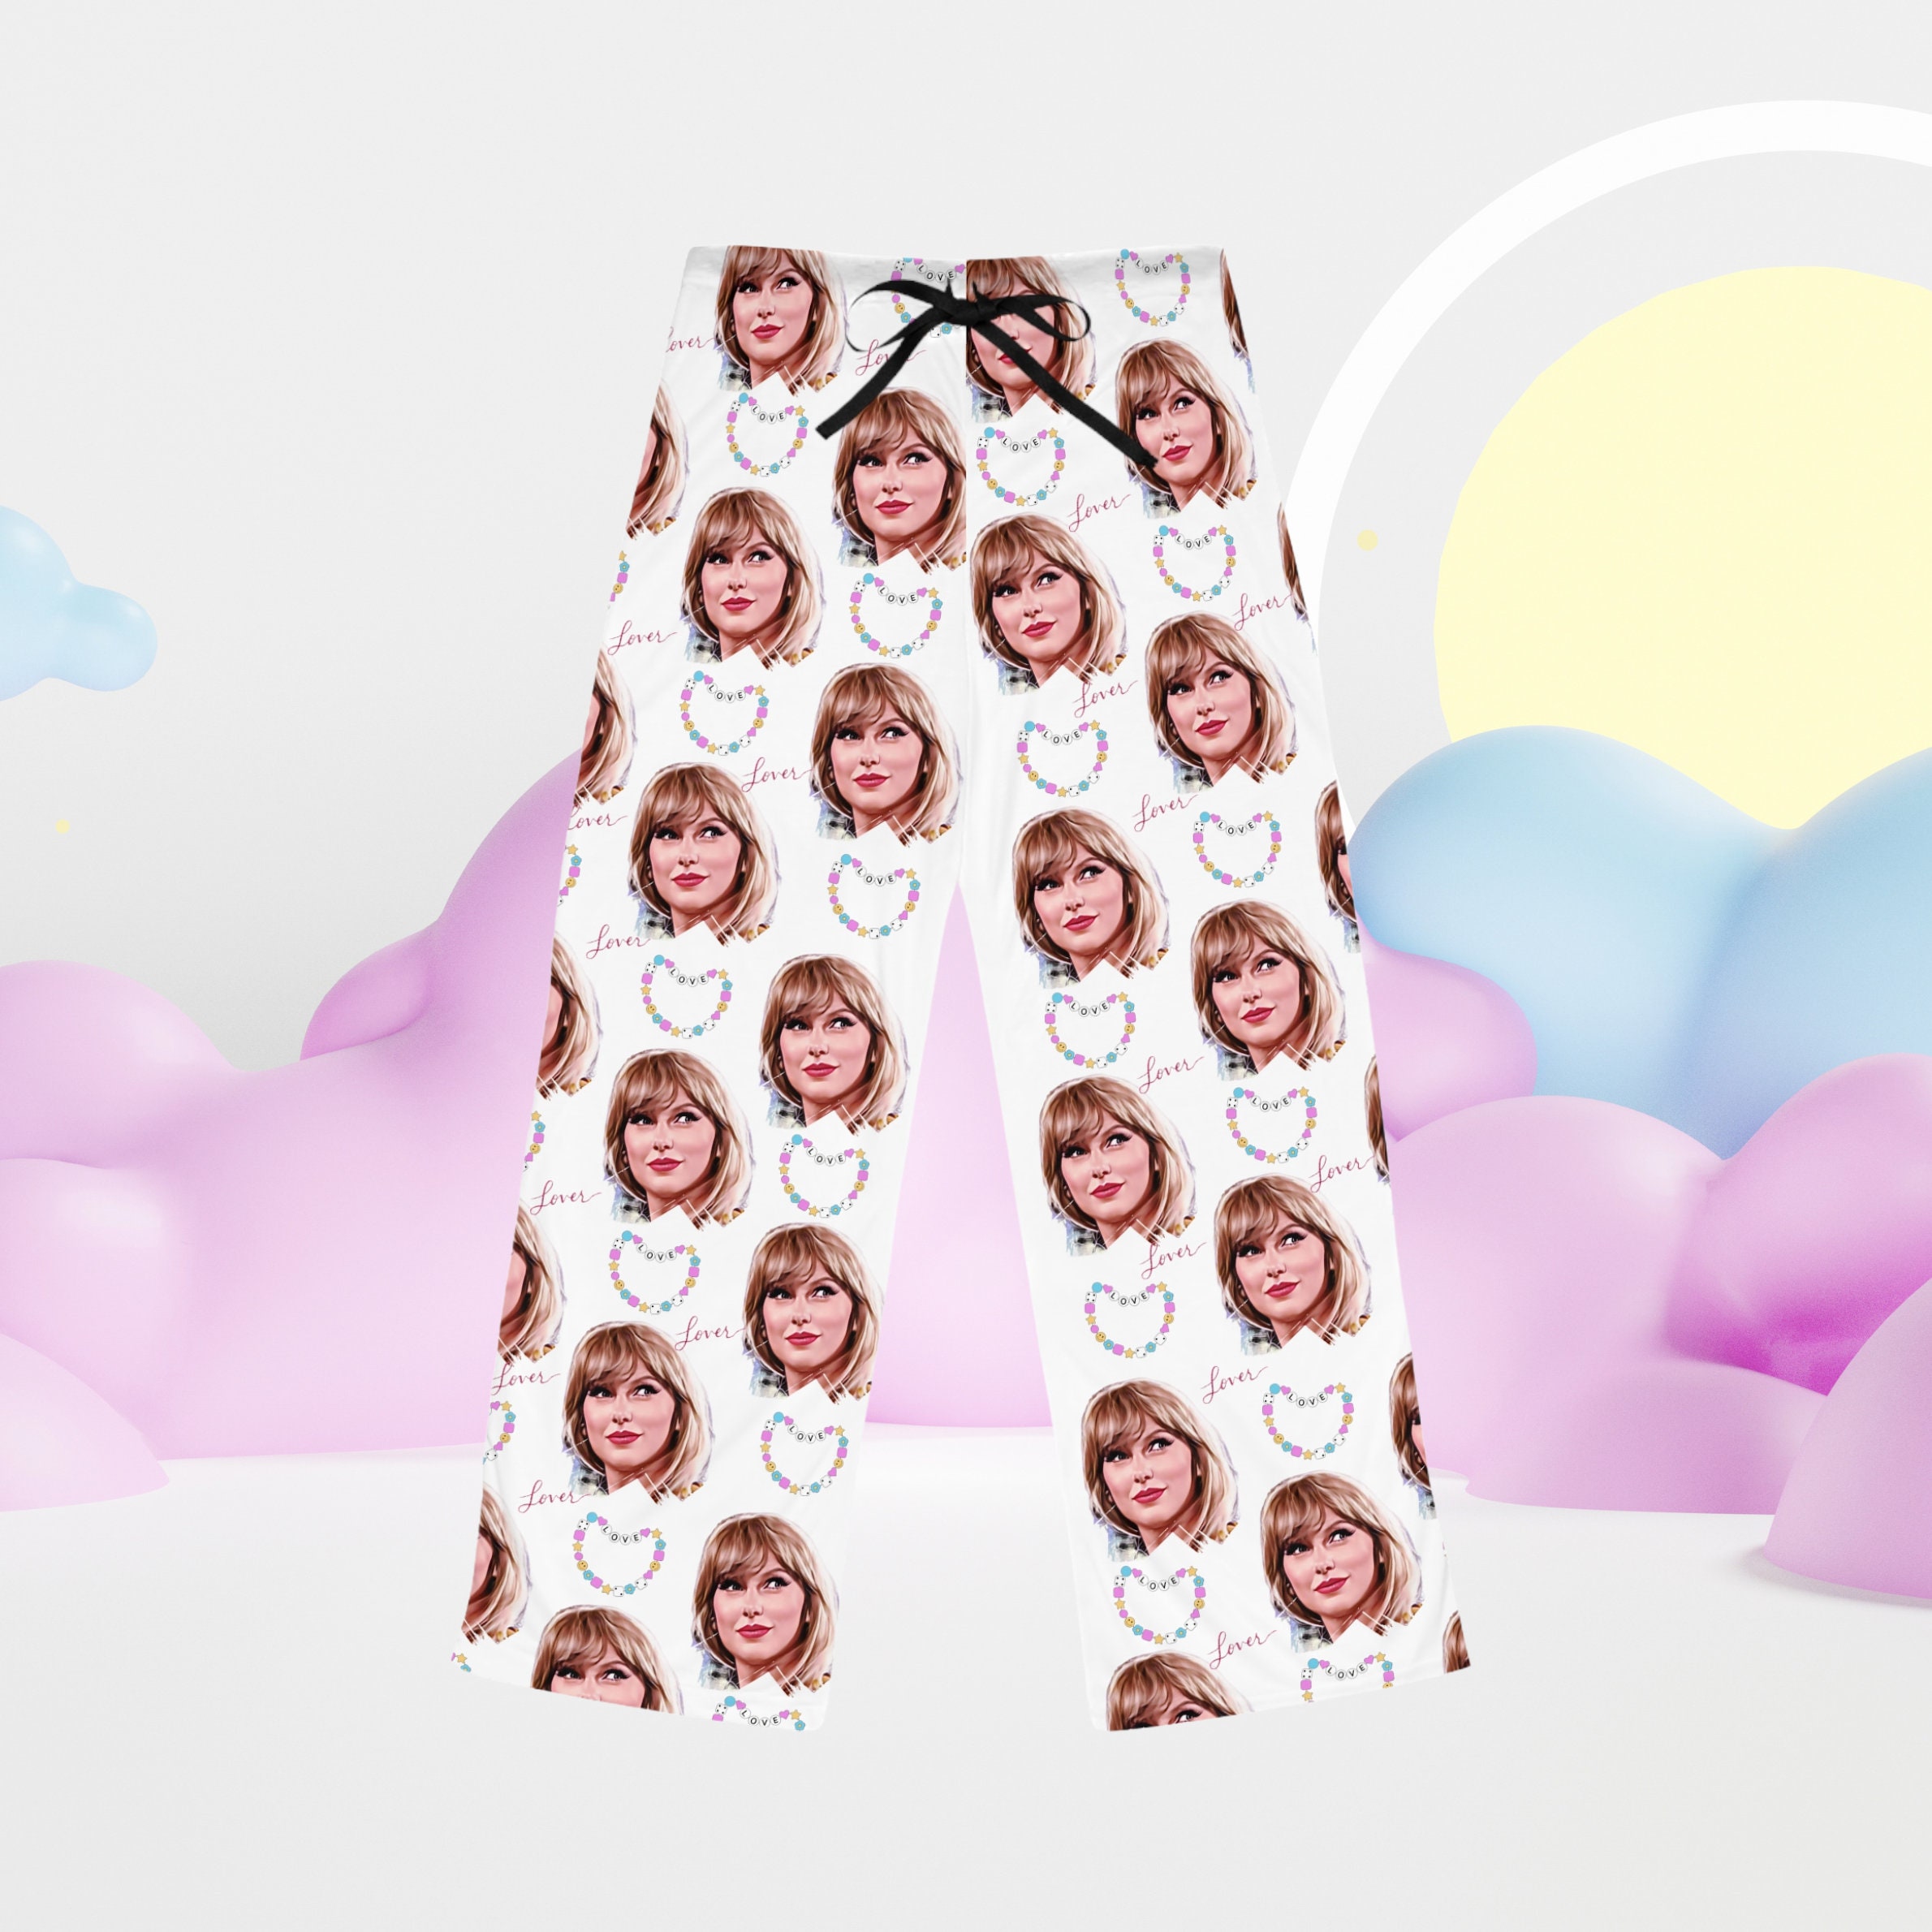 taylor version Pajama Pants, Taylor Merch, Gift For Mother's day